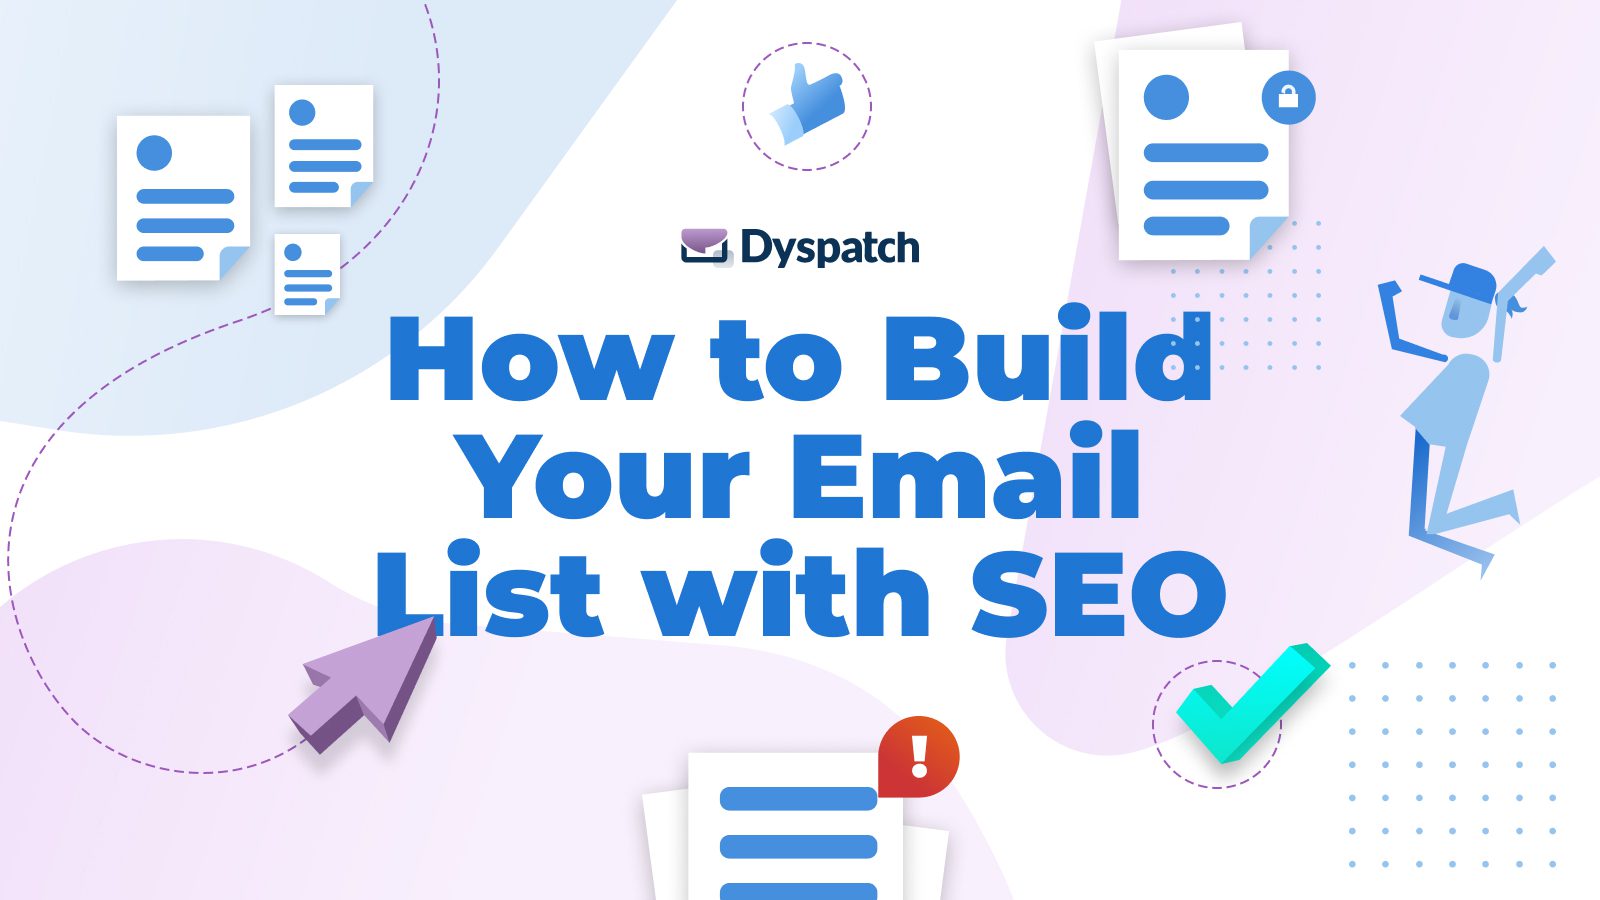 Dyspatch blog - How to build your email list with SEO